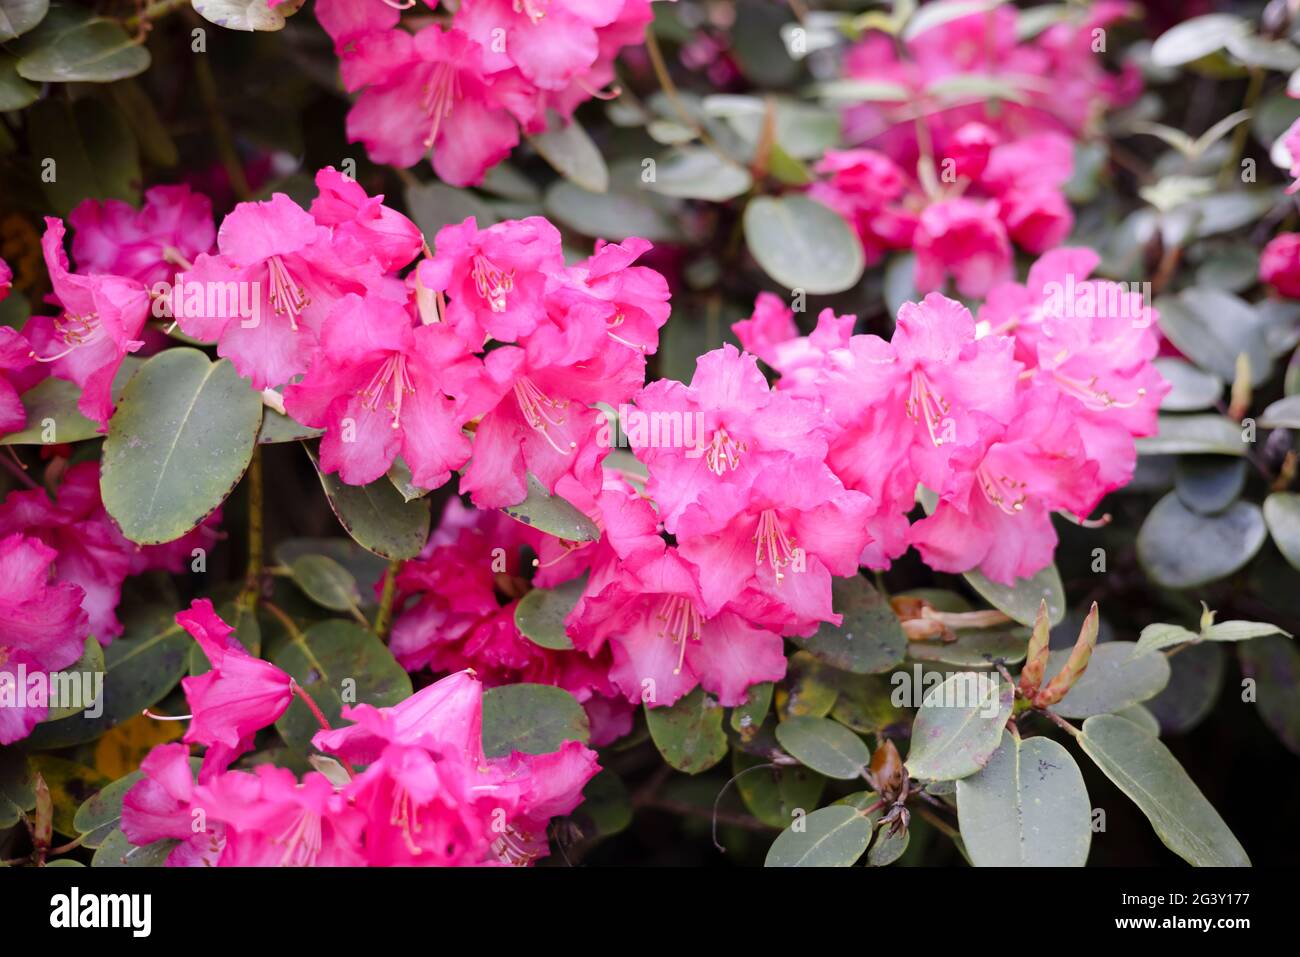 Pink flowering rhododendron shrubs in a park. Stock Photo